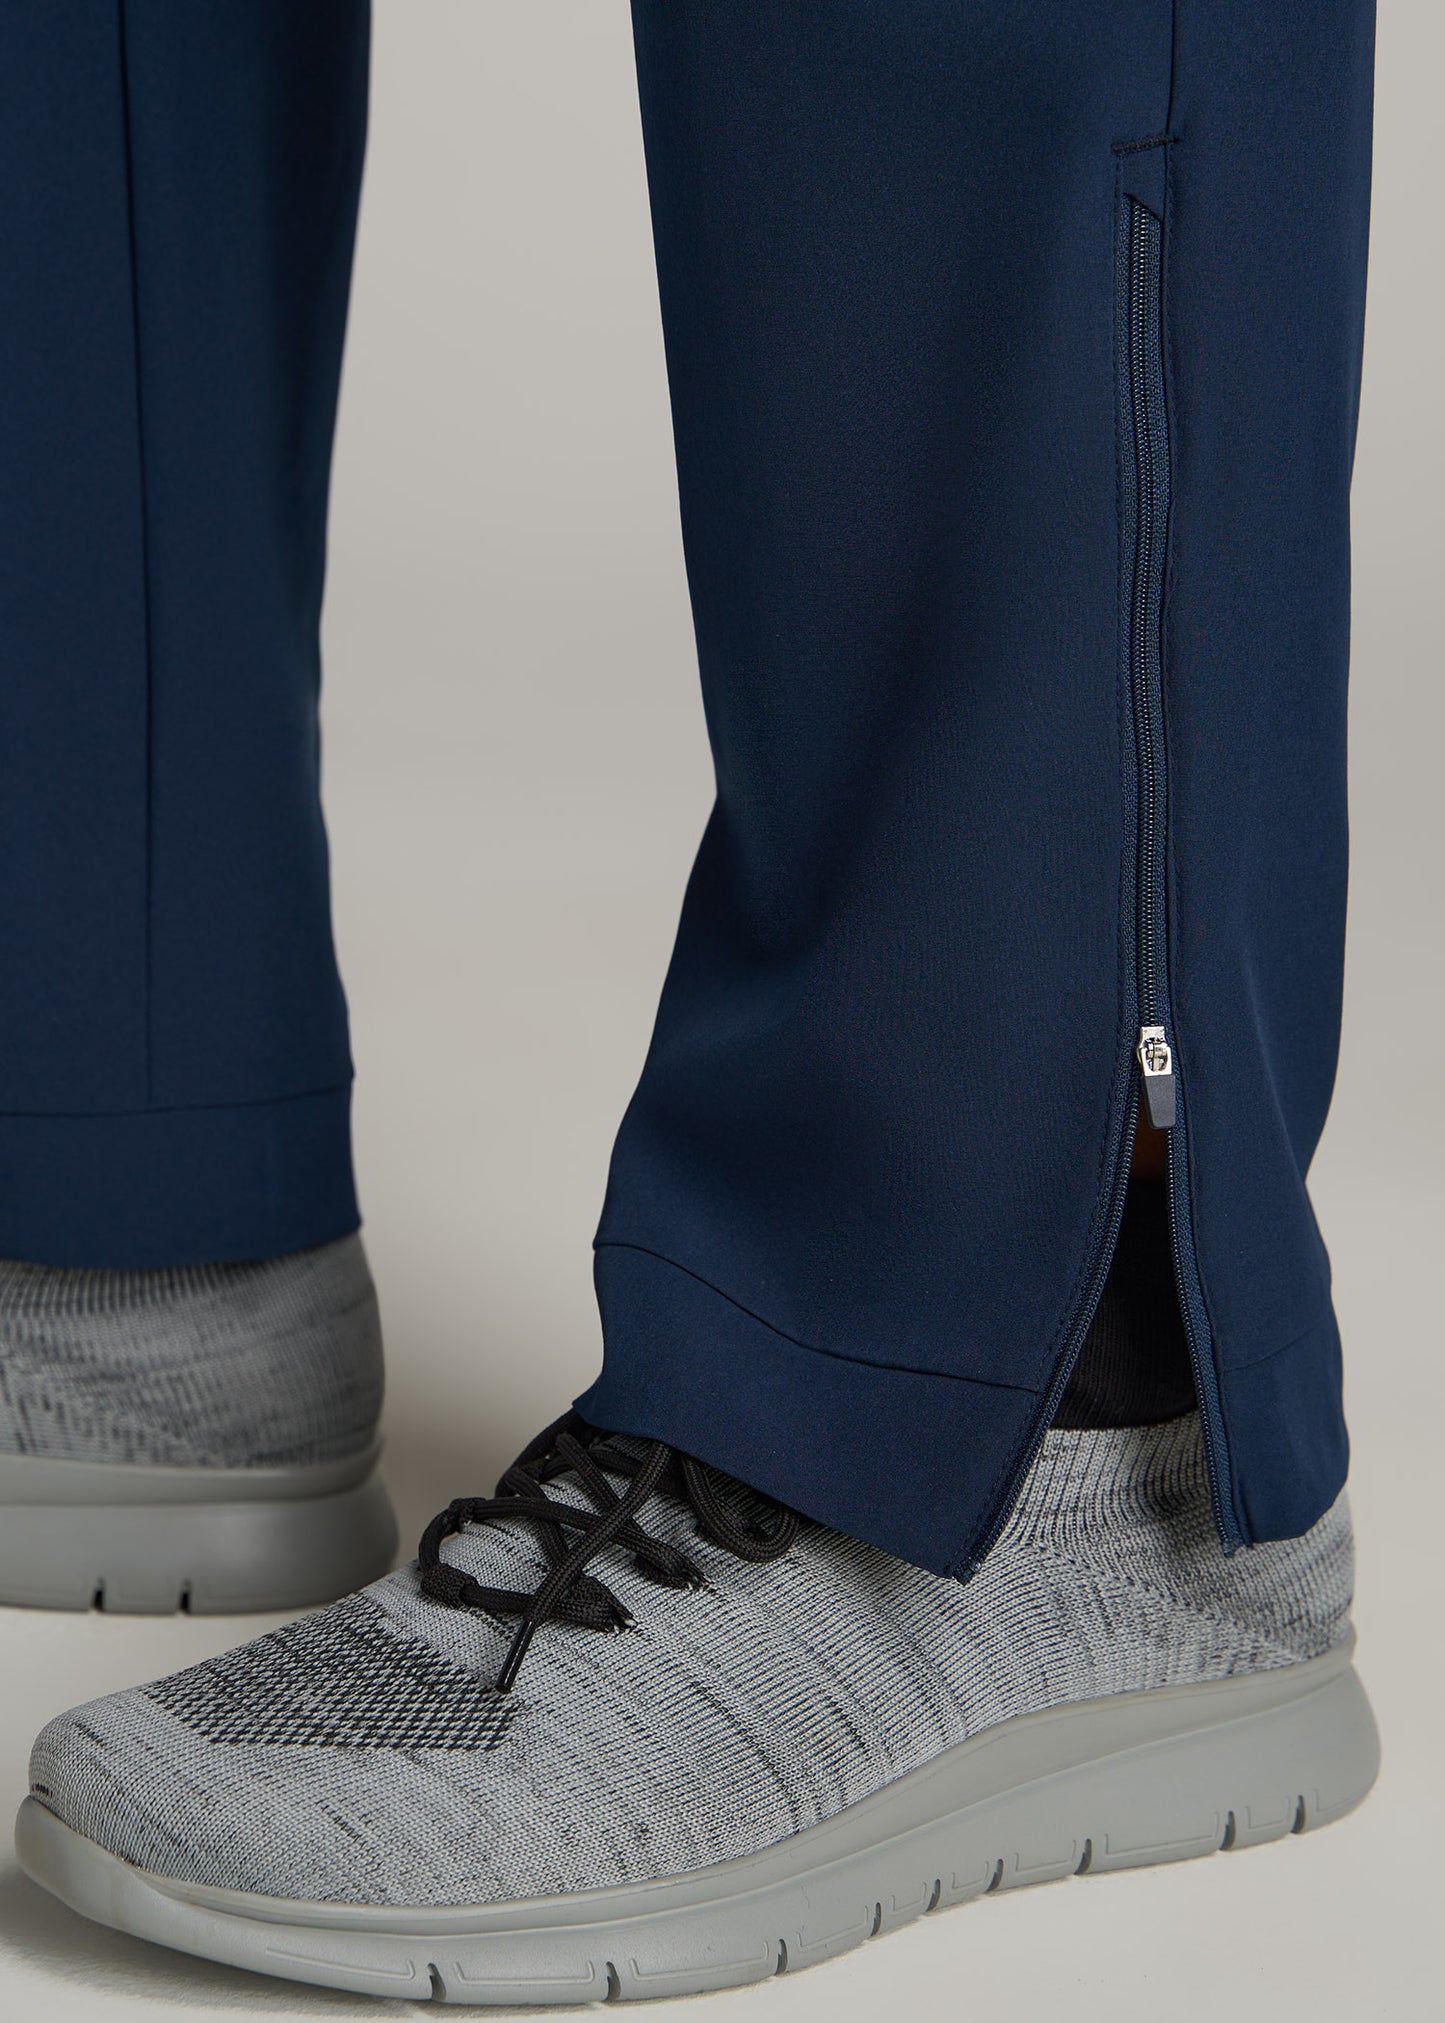 RELAXED FIT Lightweight Athletic Pants for Tall Men in Navy